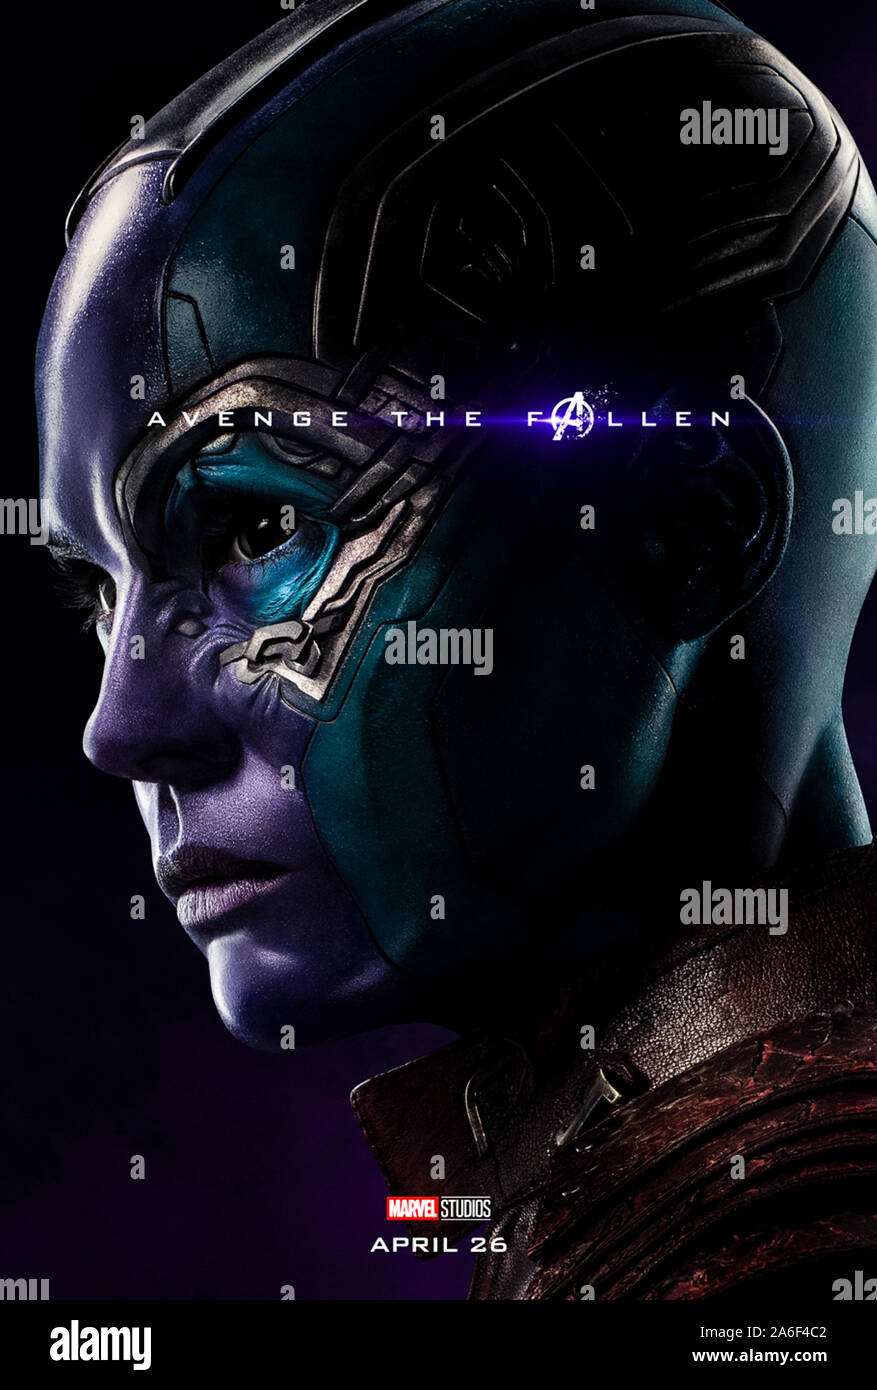 Character advance poster for Avengers: Endgame (2019) directed  by Anthony and Joe Russo starring Karen Gillan as Nebula. The epic conclusion and 22nd film in the Marvel Cinematic Universe. Stock Photo